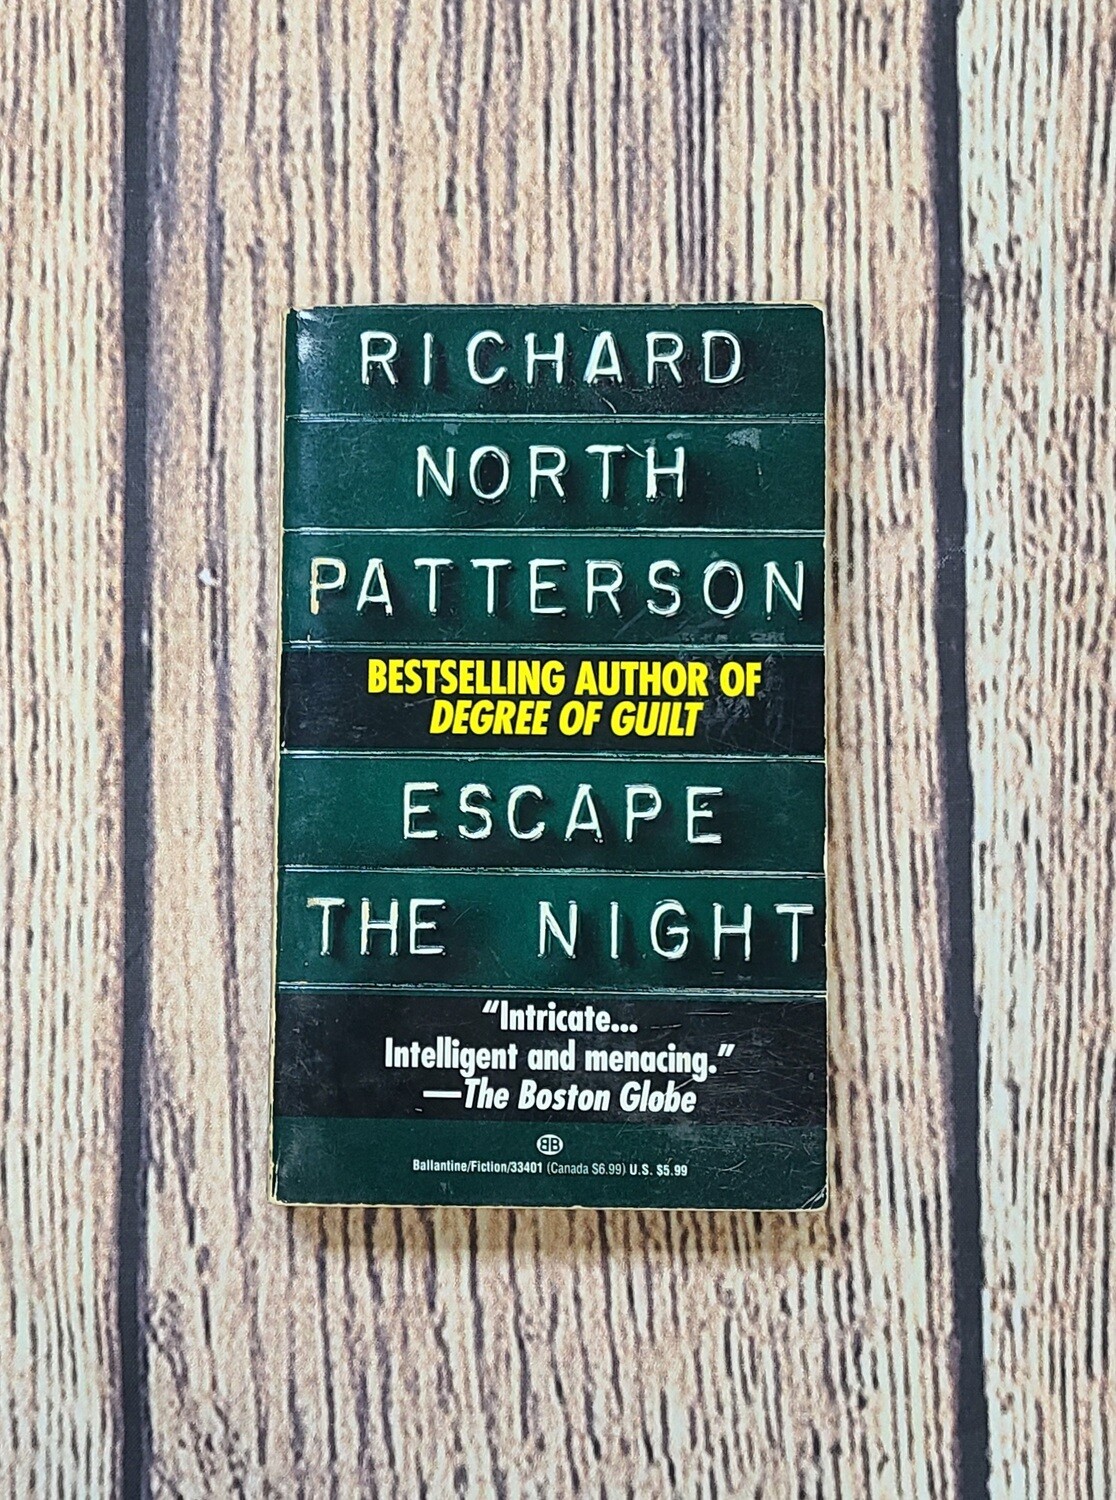 Escape the Night by Richard North Patterson